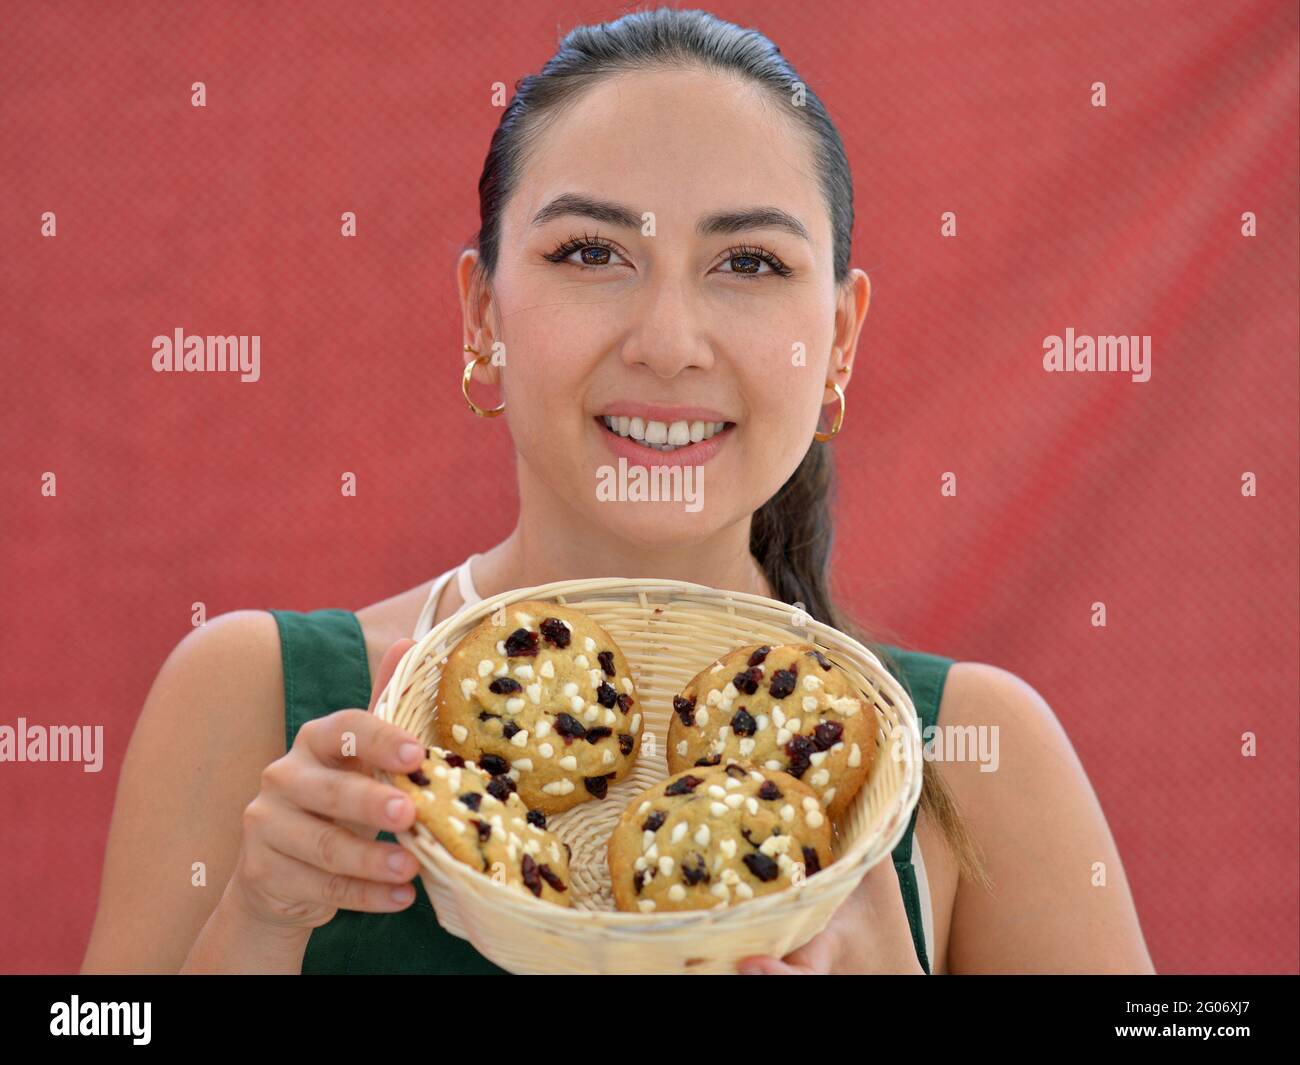 Young charming brunette salesgirl smiles to the viewermand shows a basket with home baked gourmet chocolate chip cookies in front of a red backdrop. Stock Photo